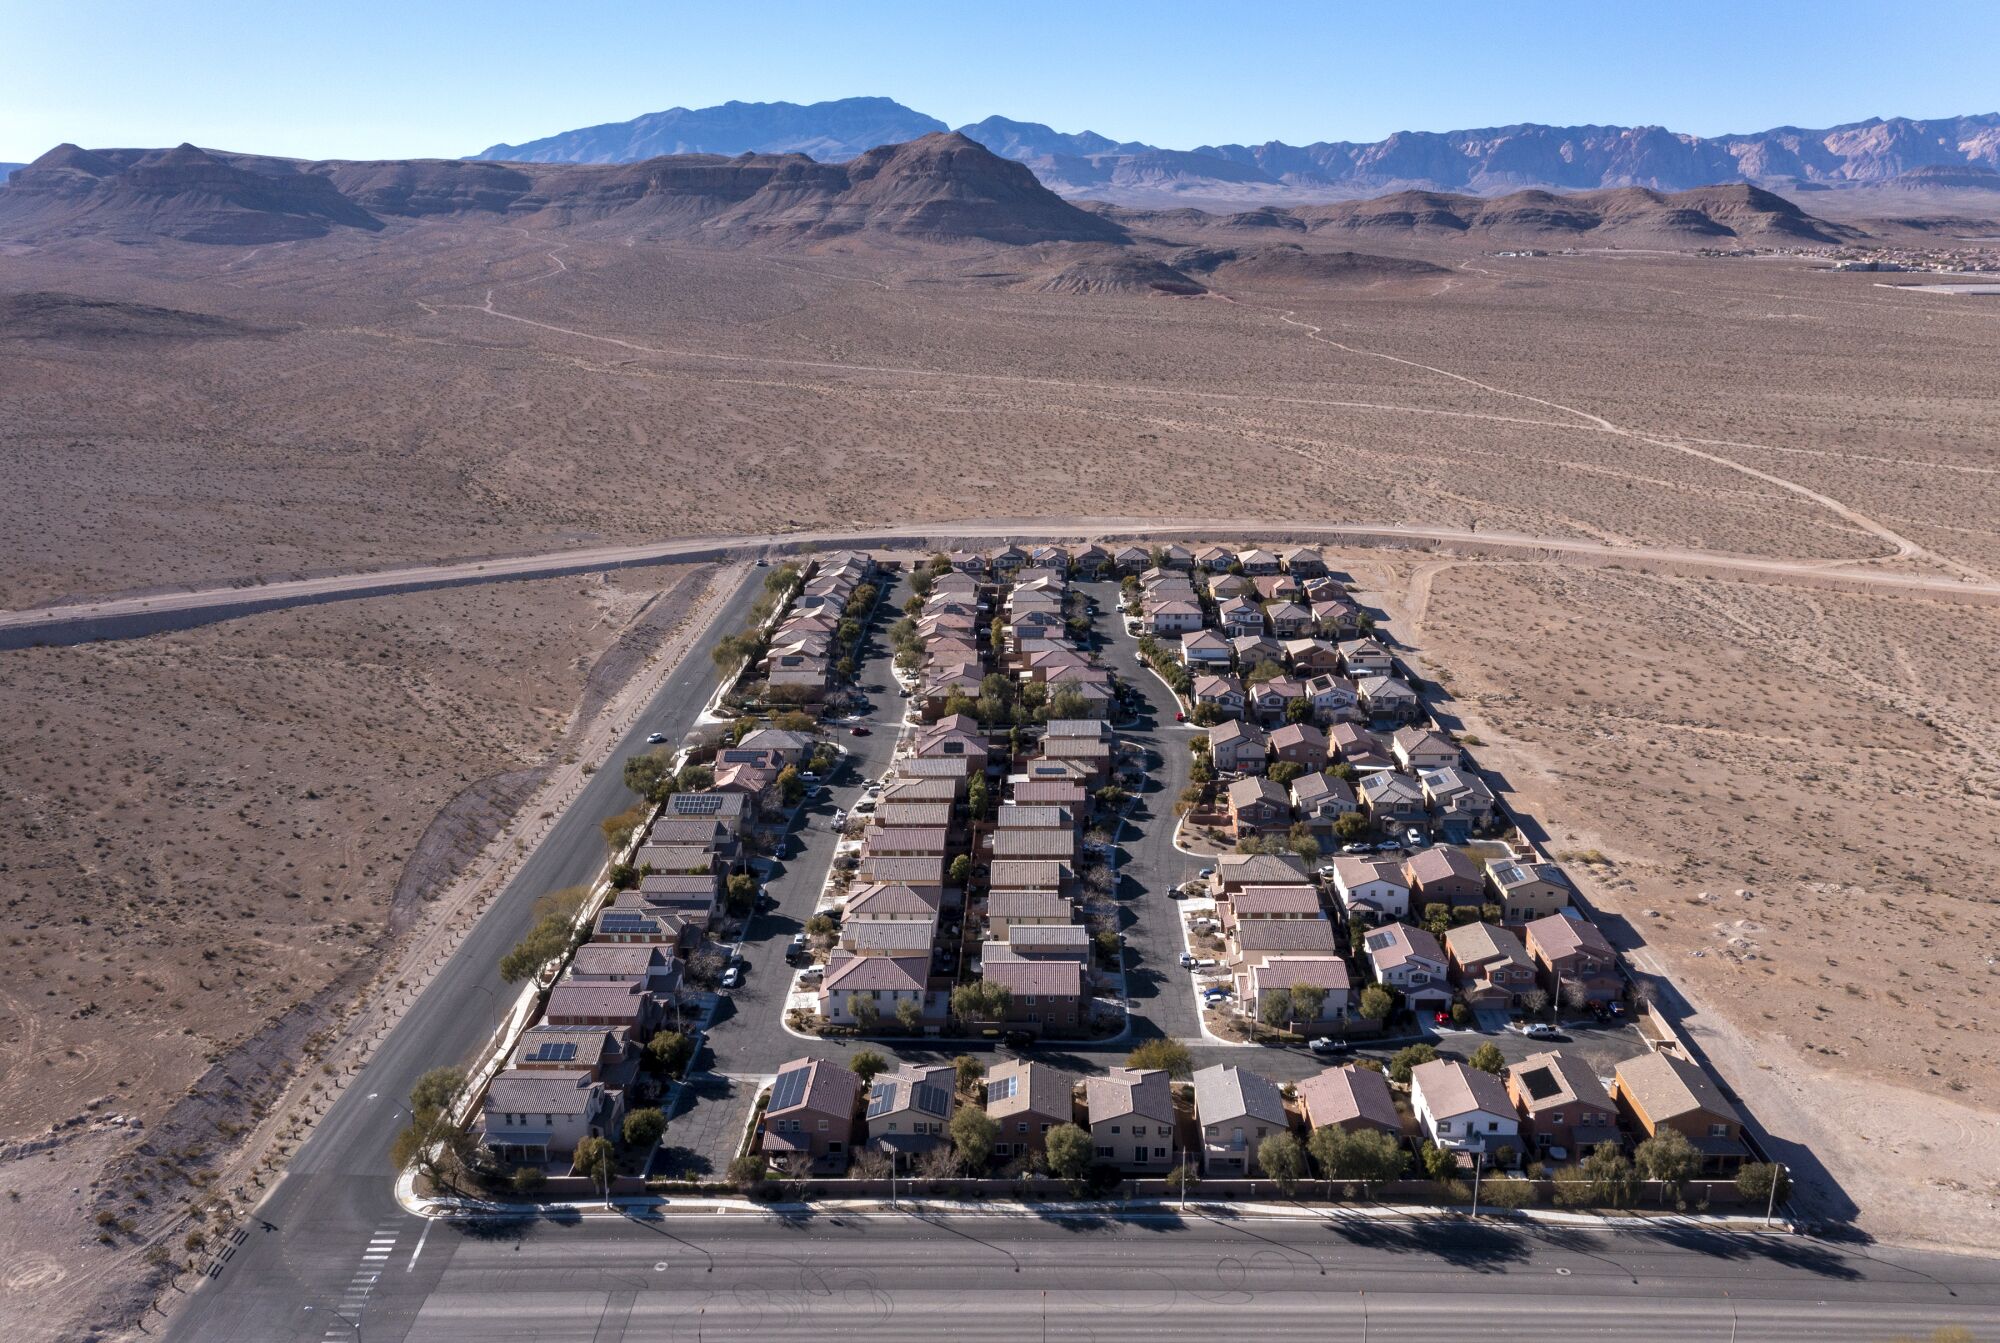 Aerial views of a suburban community in the desert